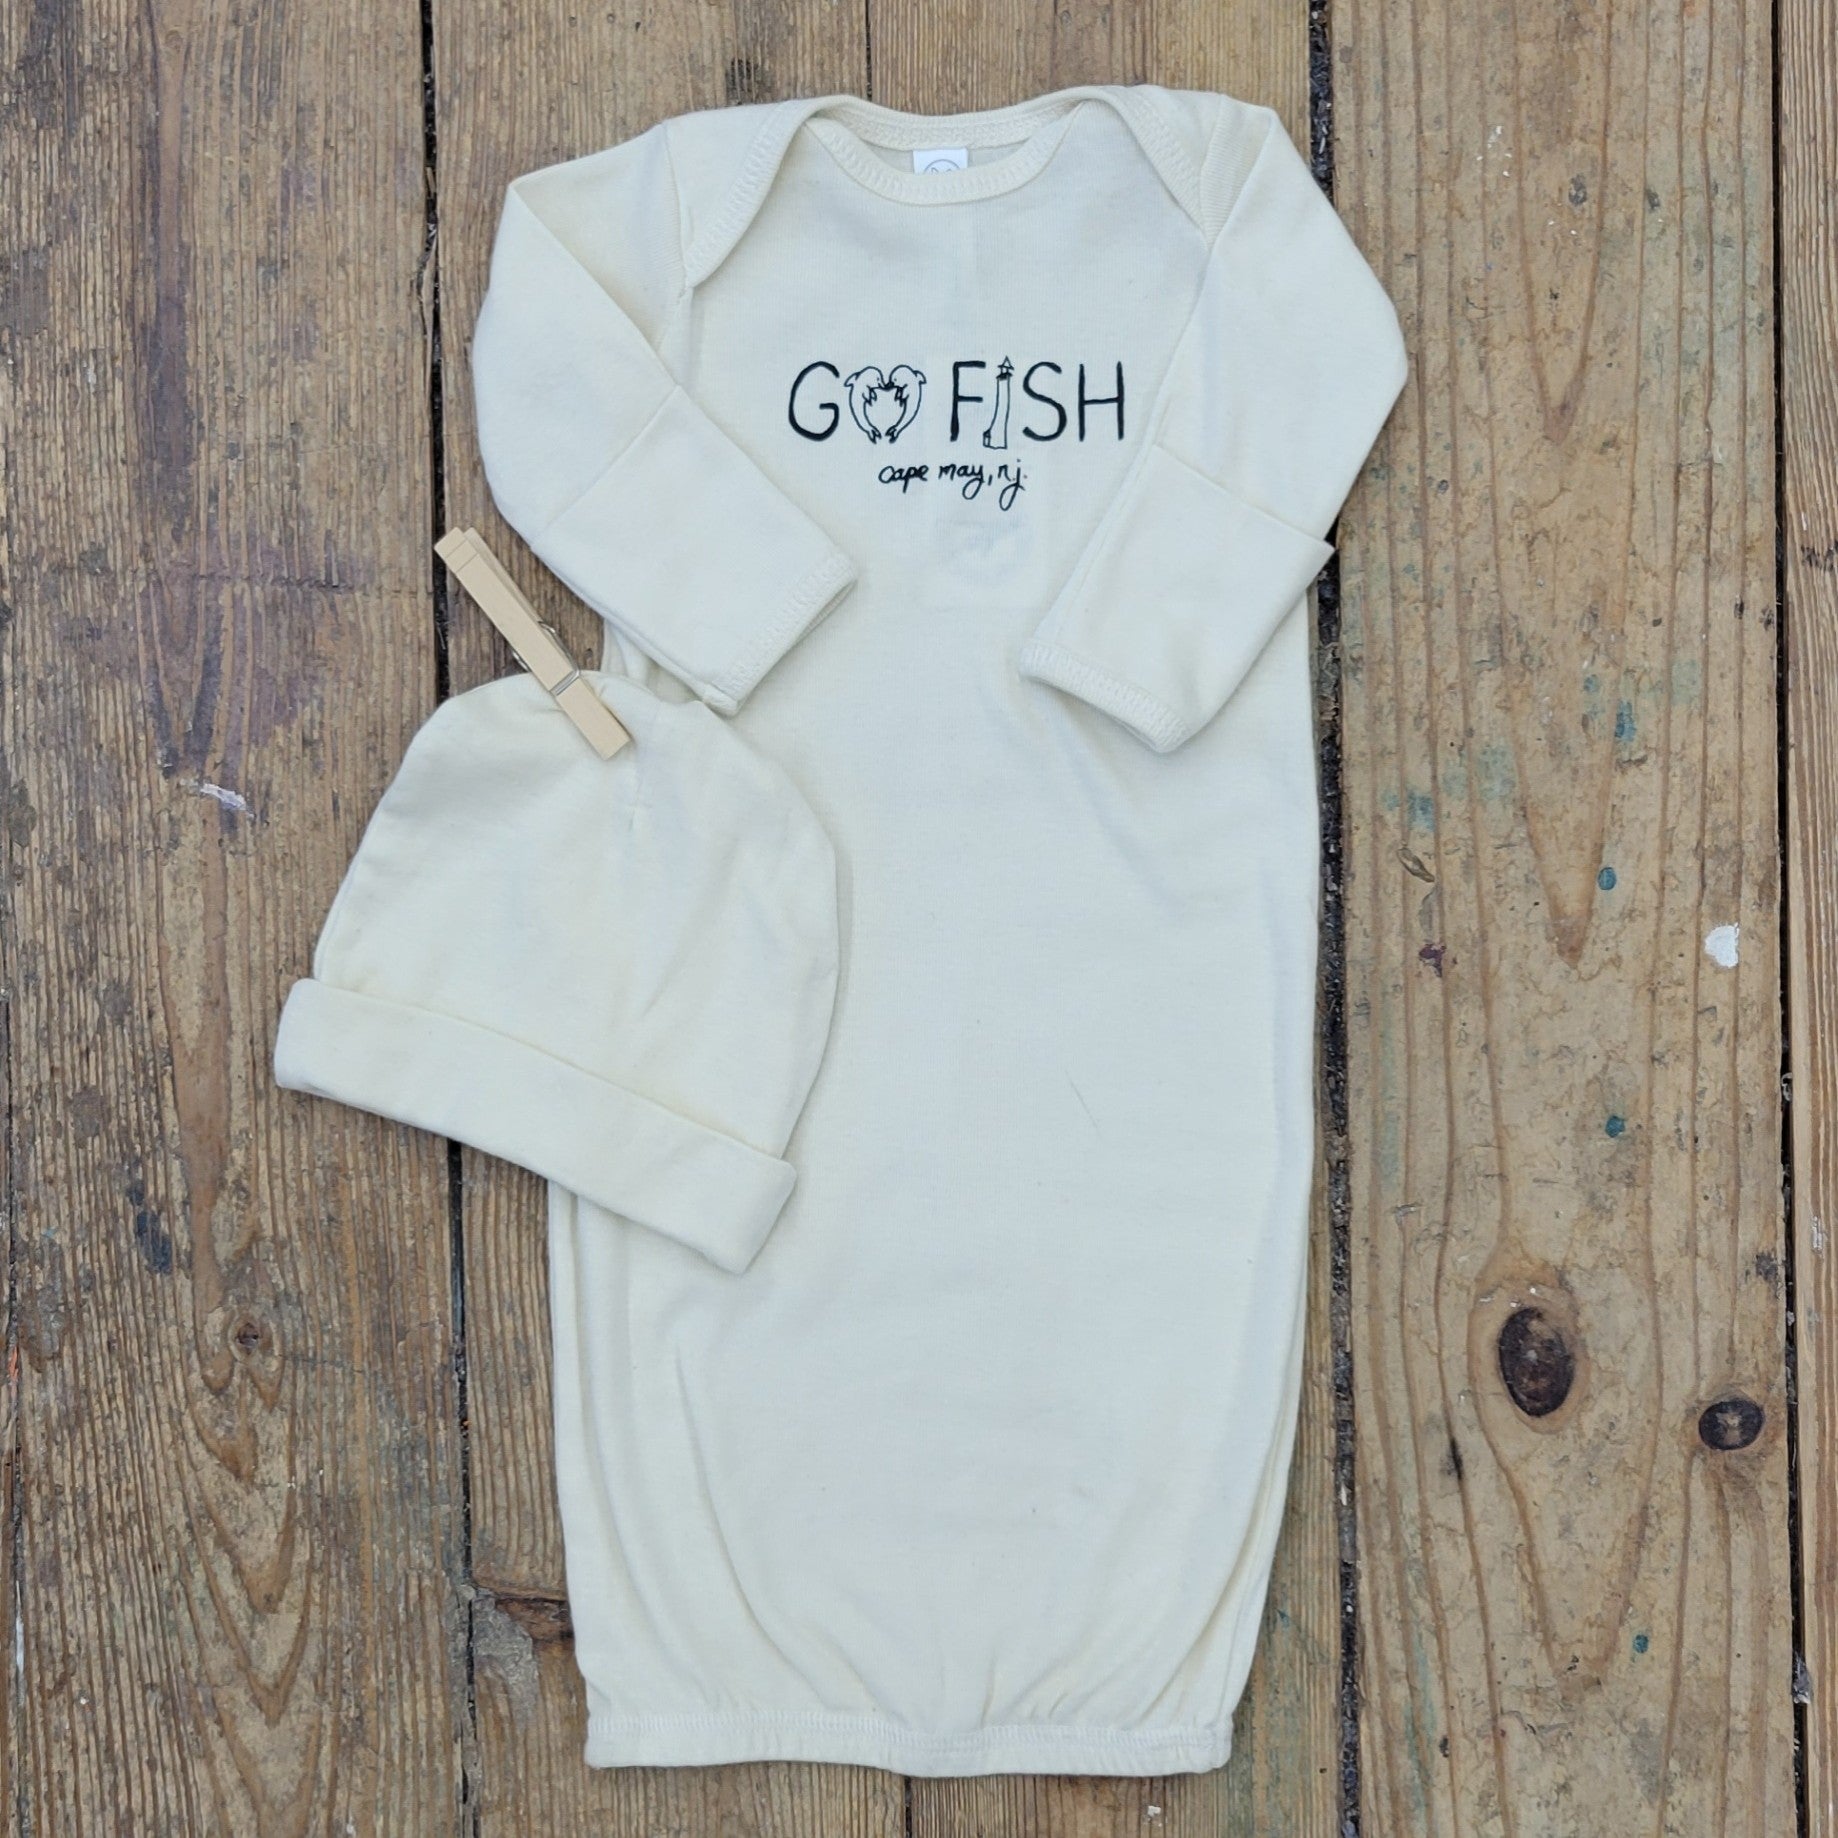 Cream layette featuring a 'Go Fish! Cape May' design on the front in black ink.